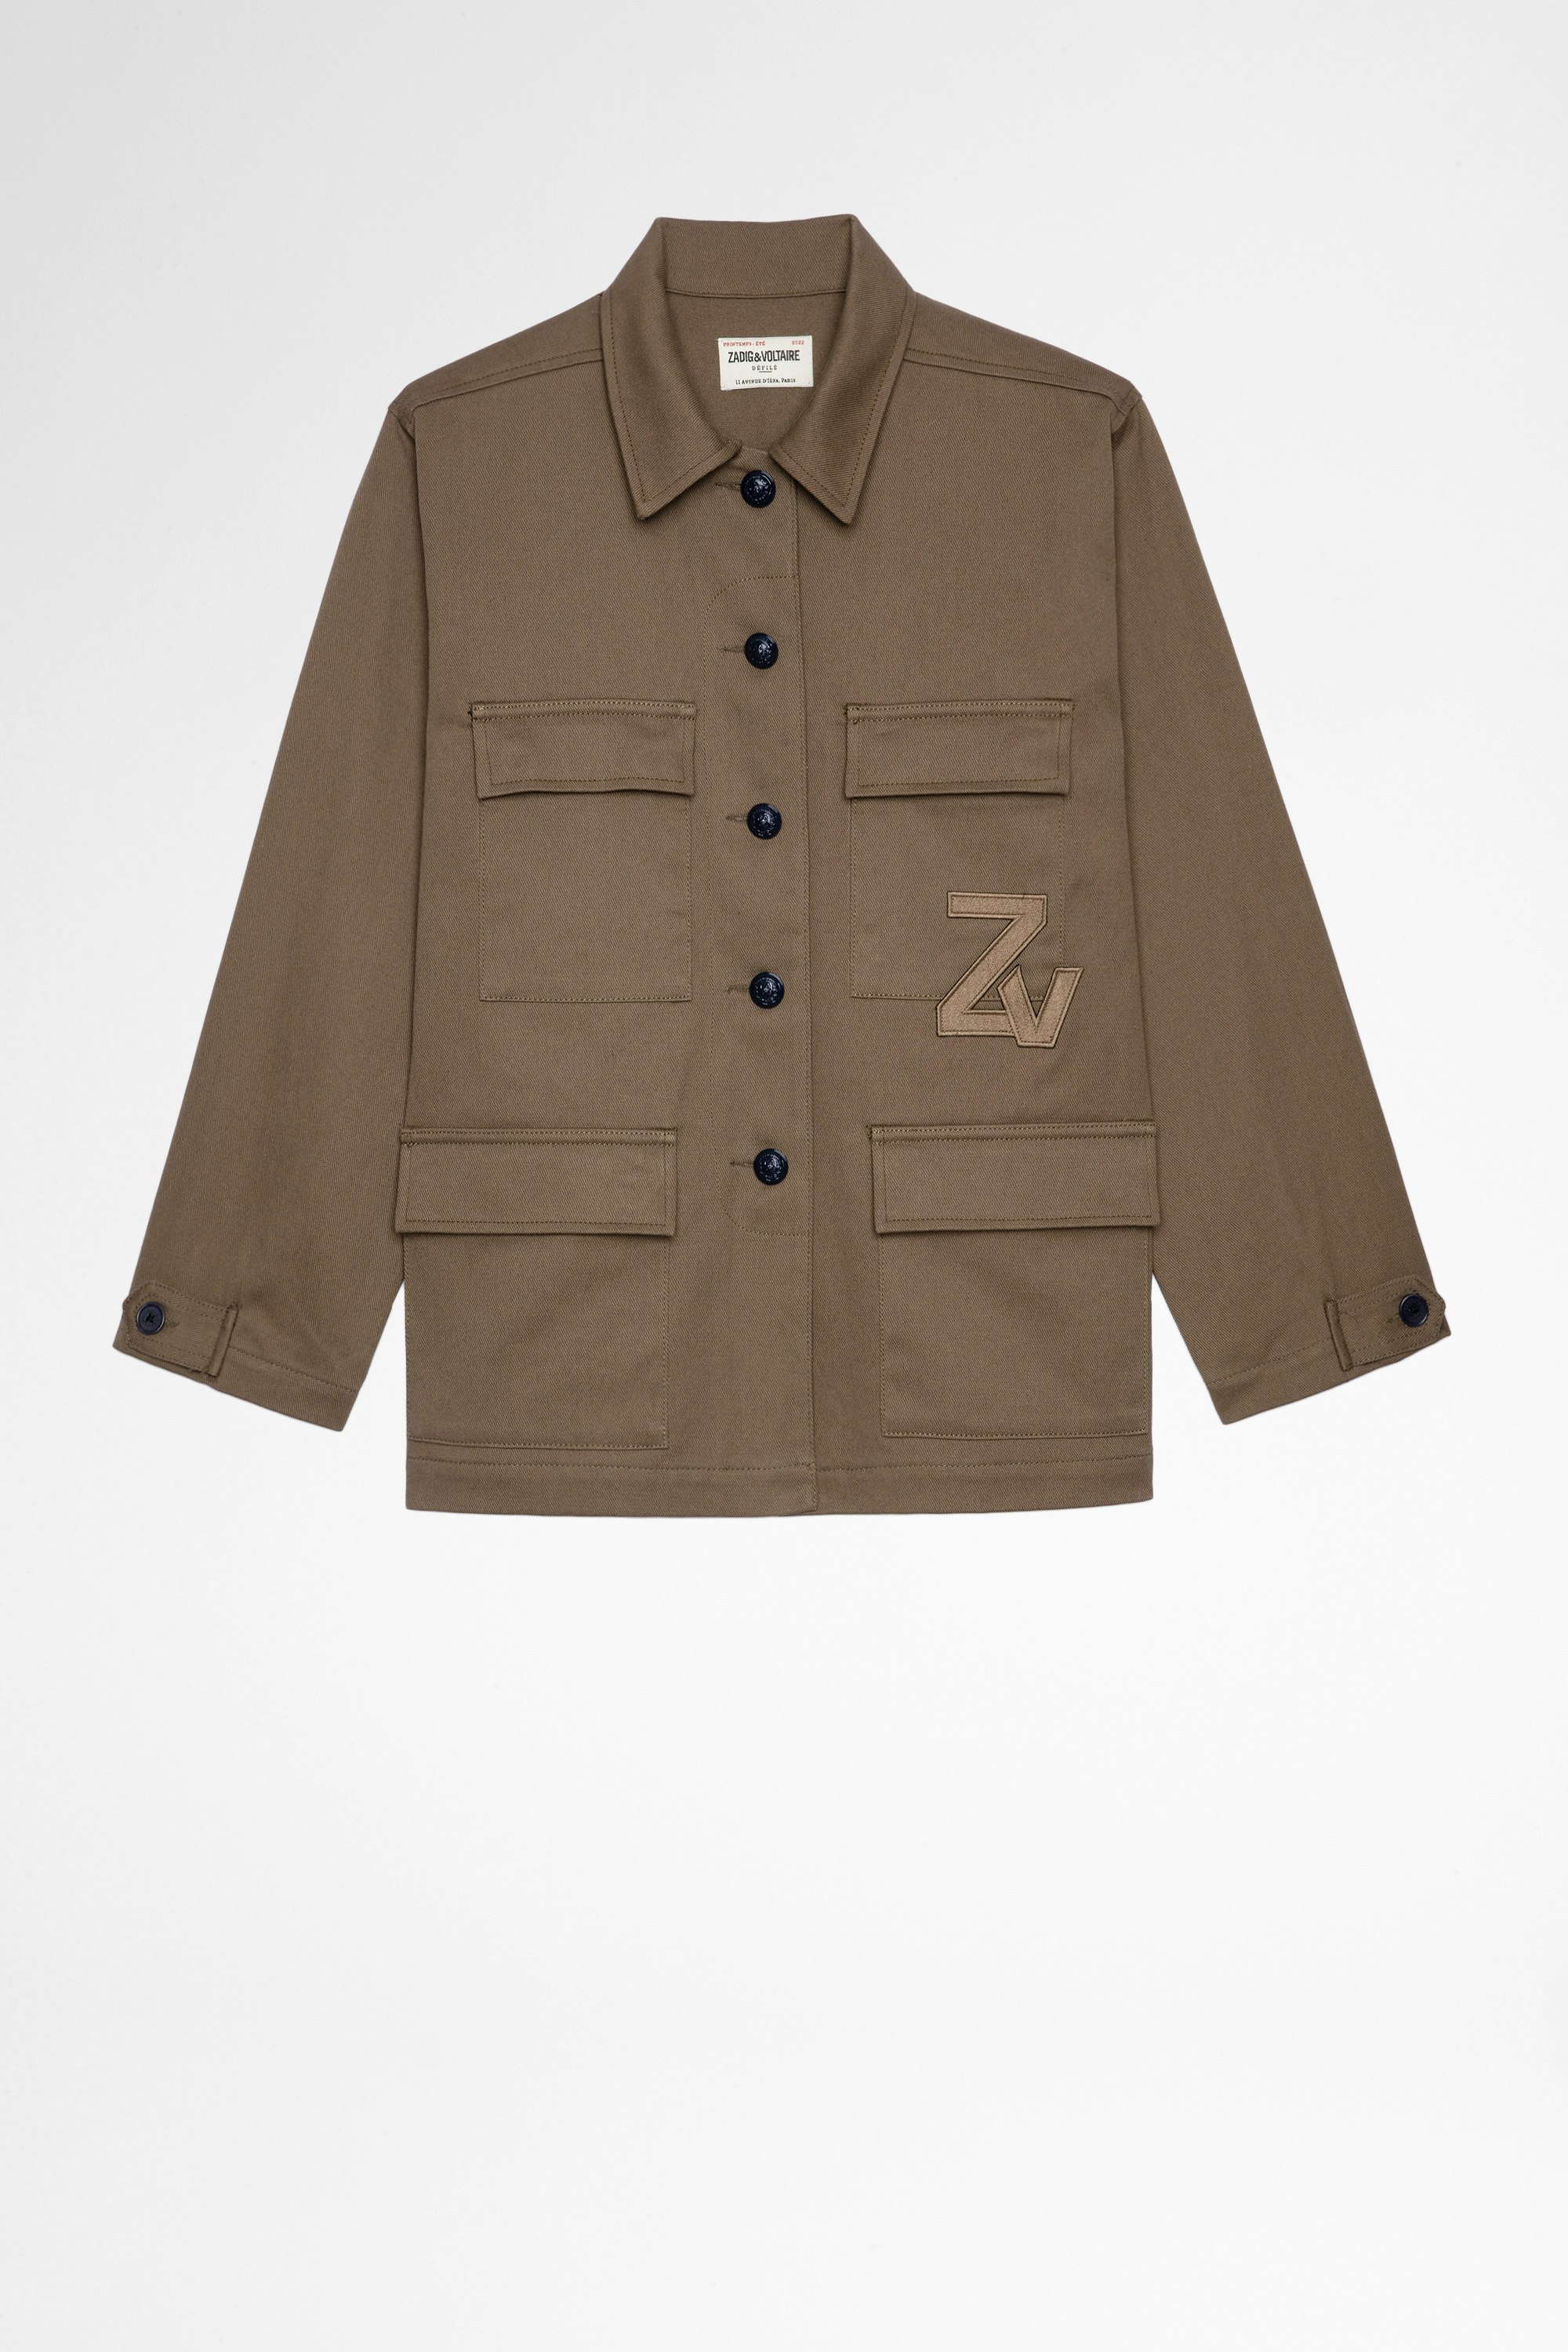 Kansas Jacket Women's khaki cotton jacket with ZV patch. Made with recycled fibers